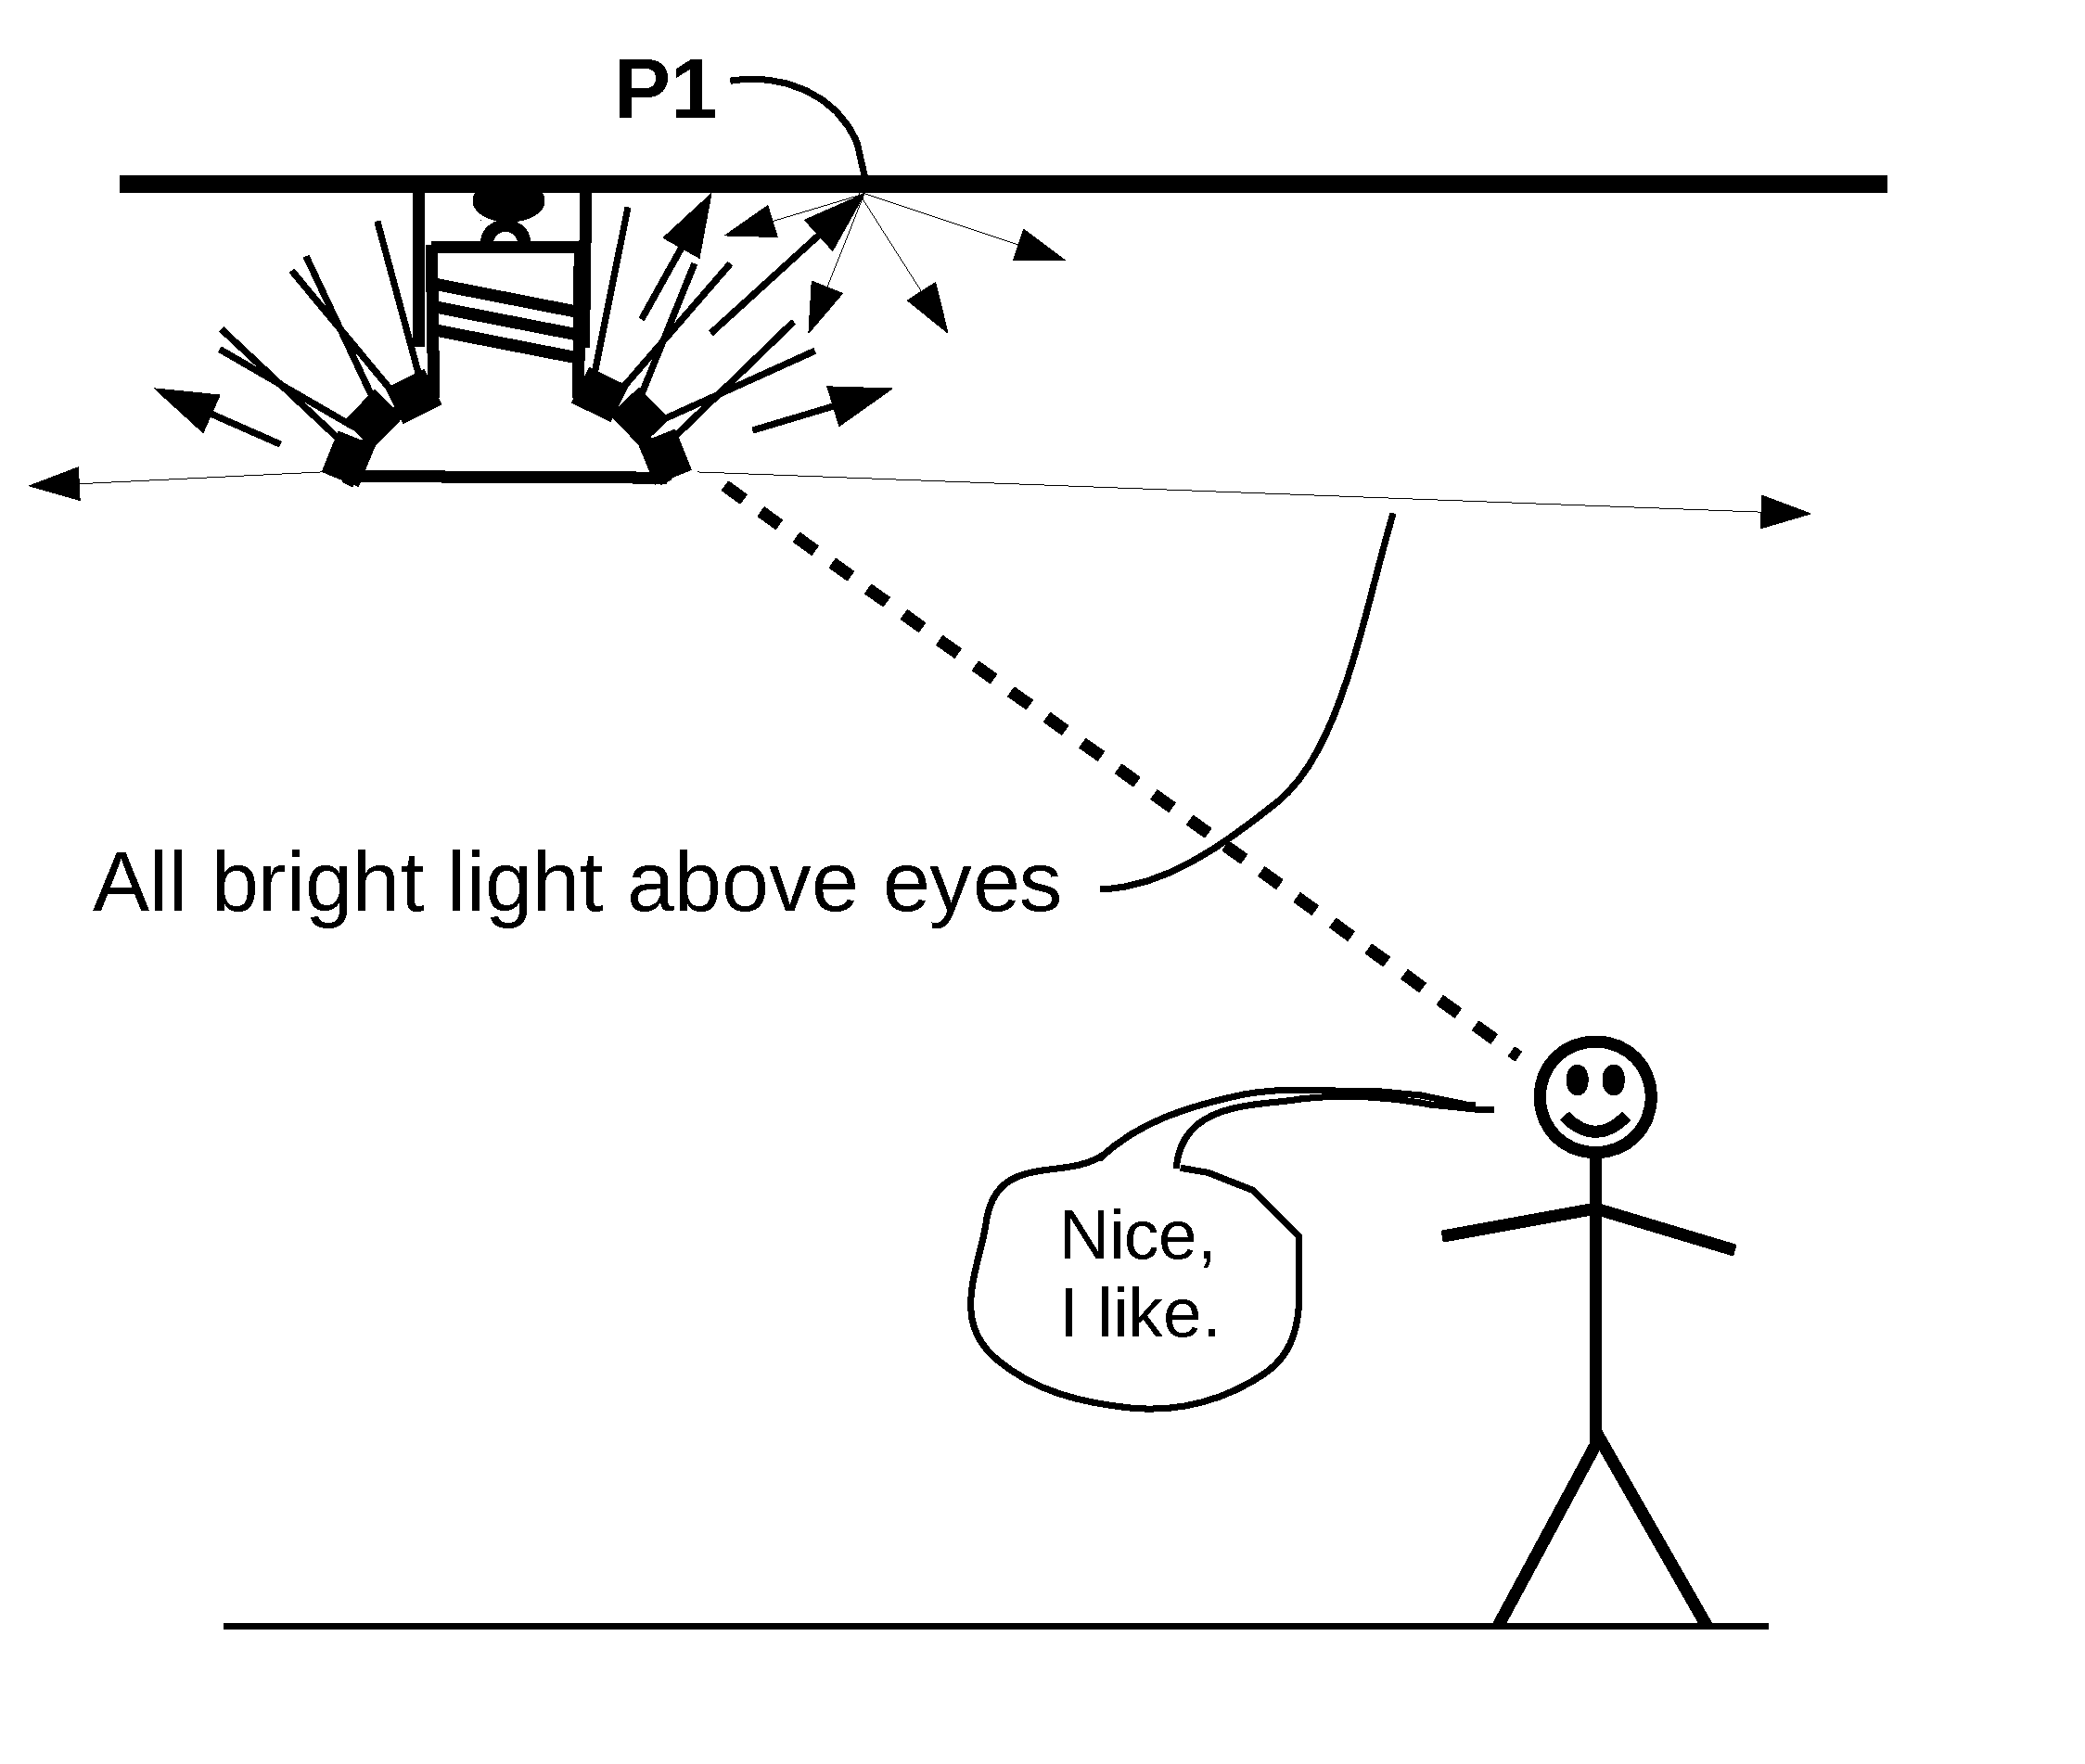 Method and means to evenly distribute ambient illumination and to avoid bright LED beam directly into human eyes